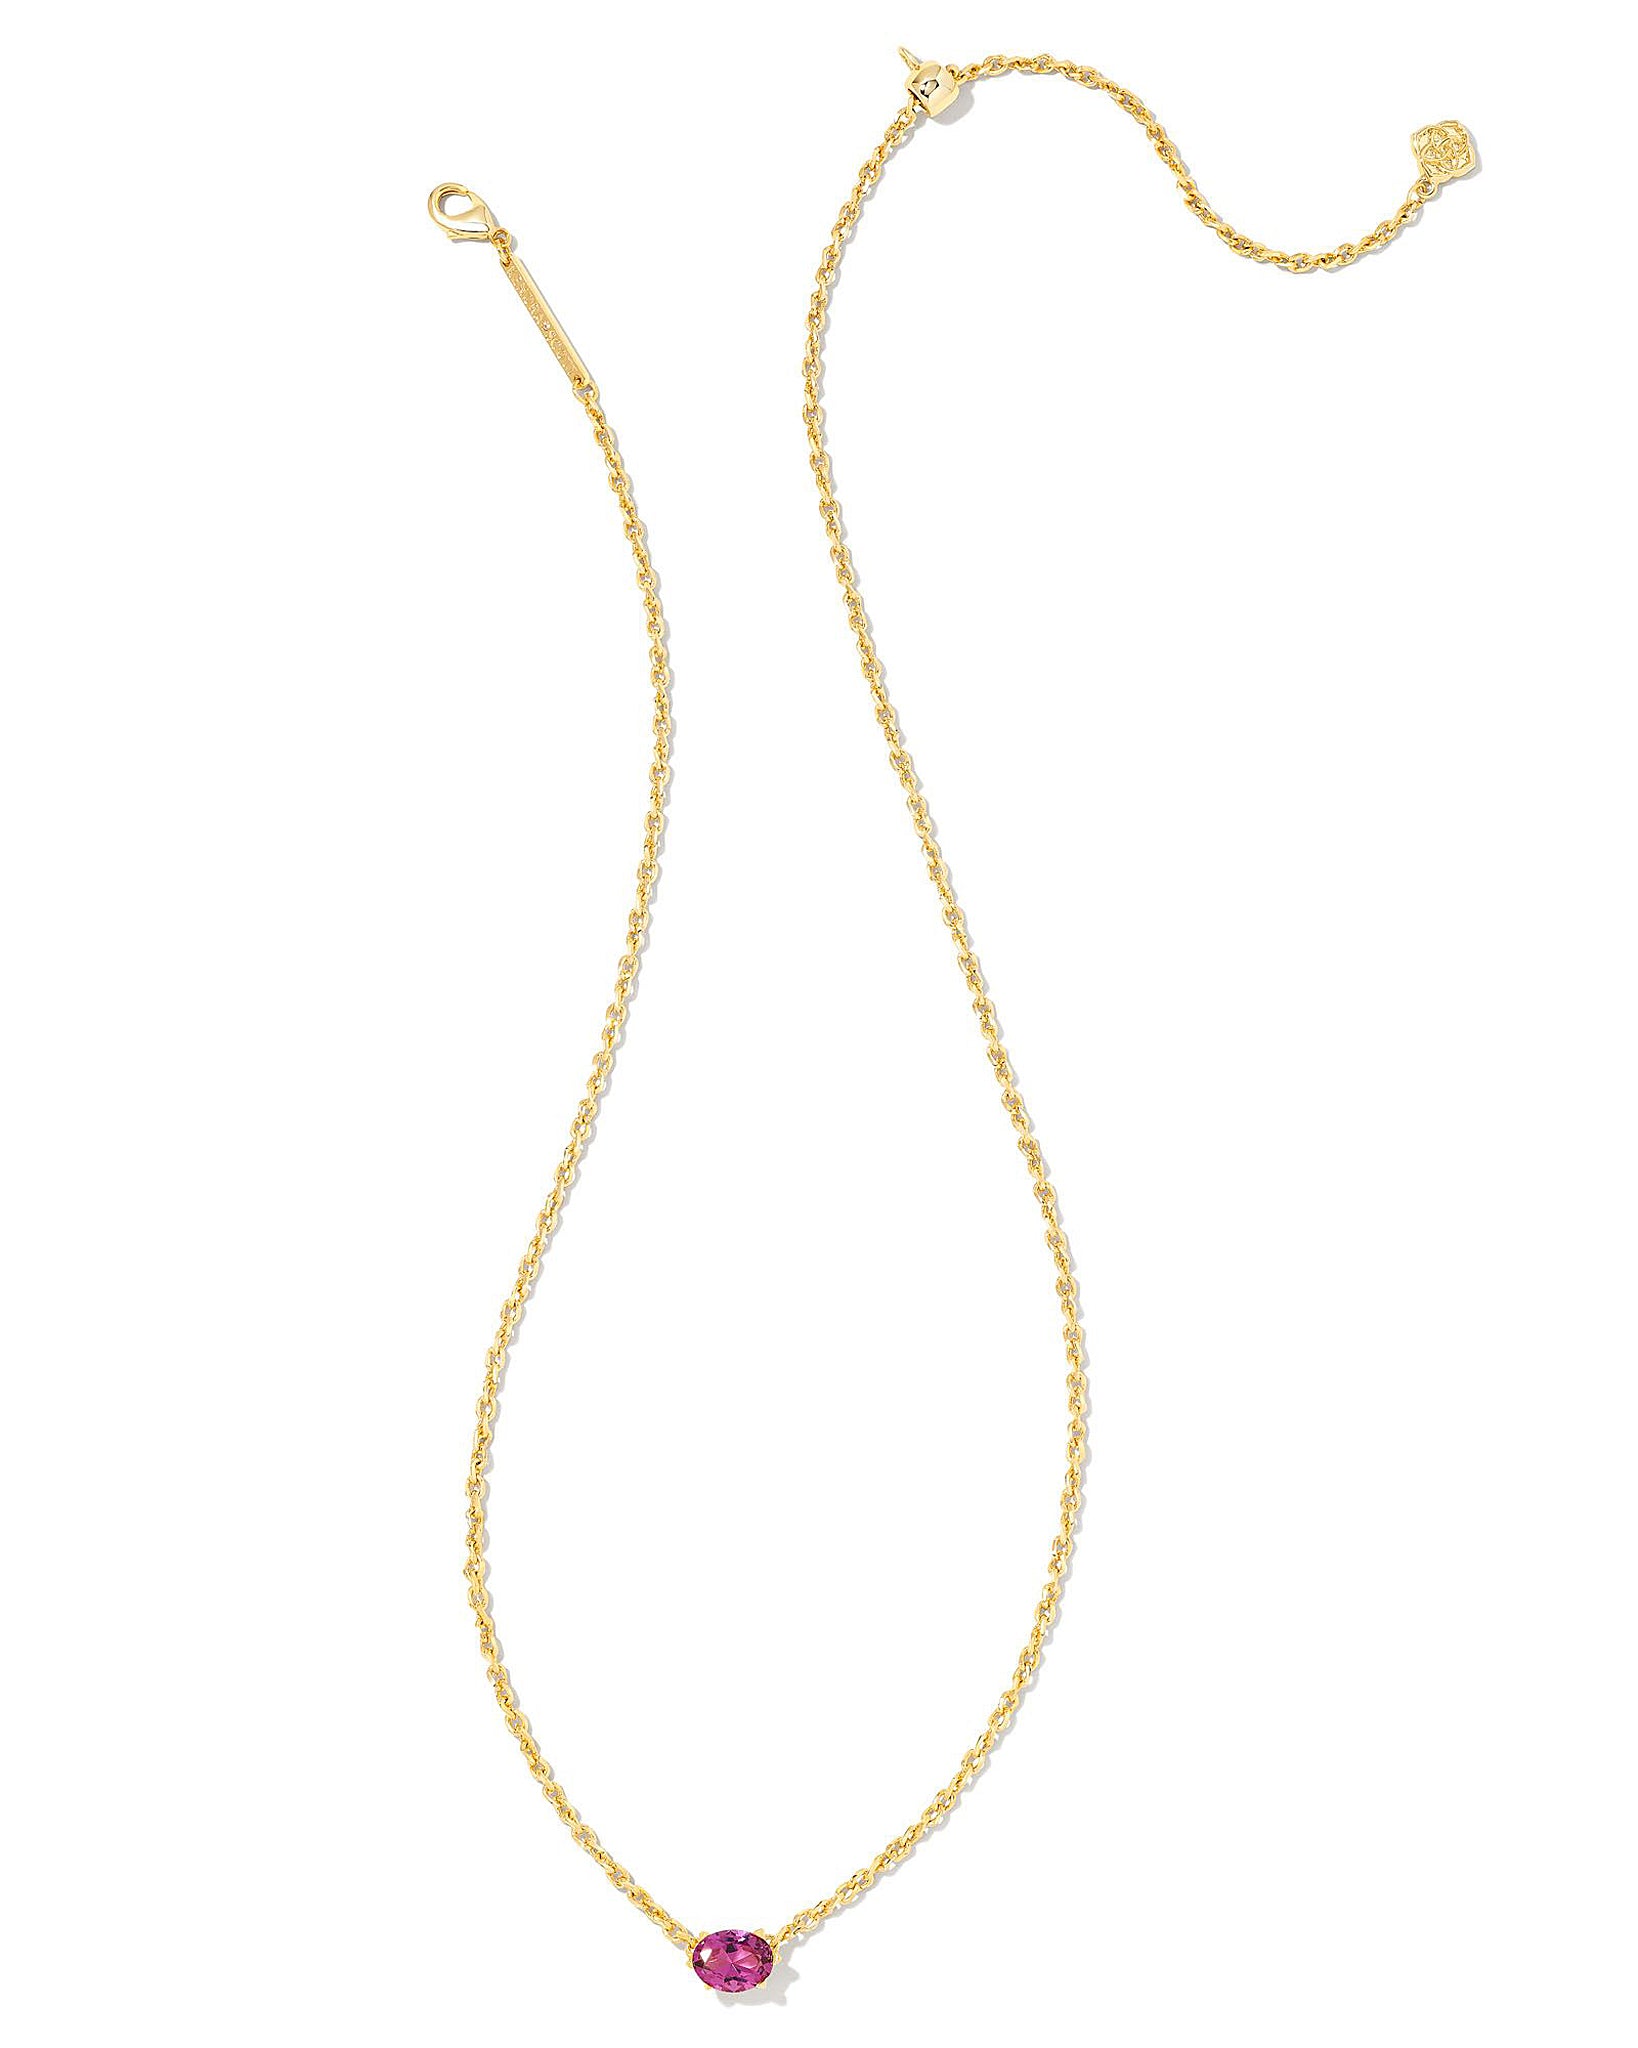 Kendra Scott Cailin Oval Pendant Necklace in Purple Crystal and Gold